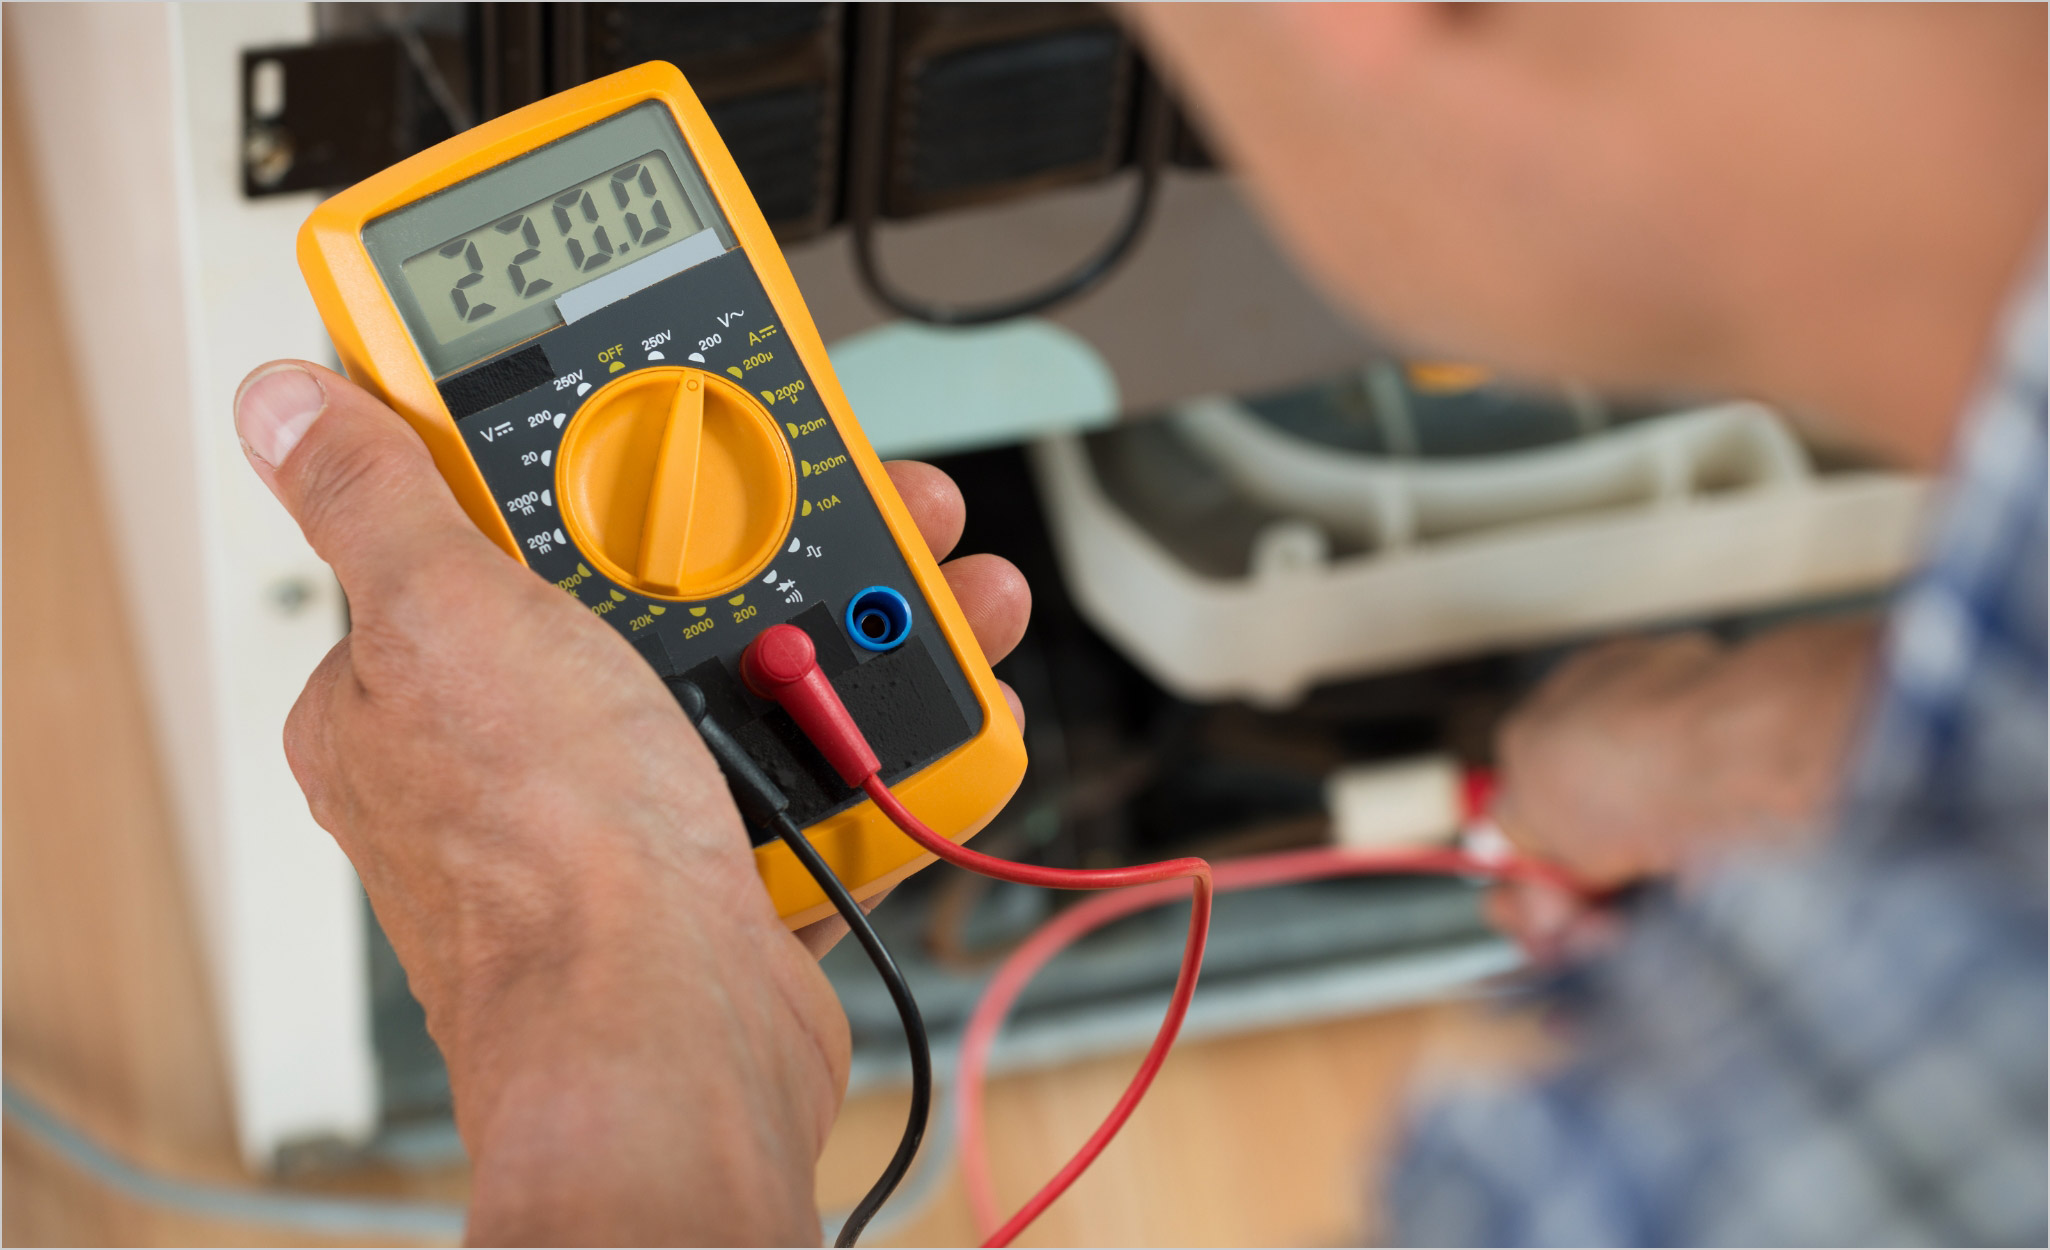 A Pro uses a multimeter to check whether wiring is hot.